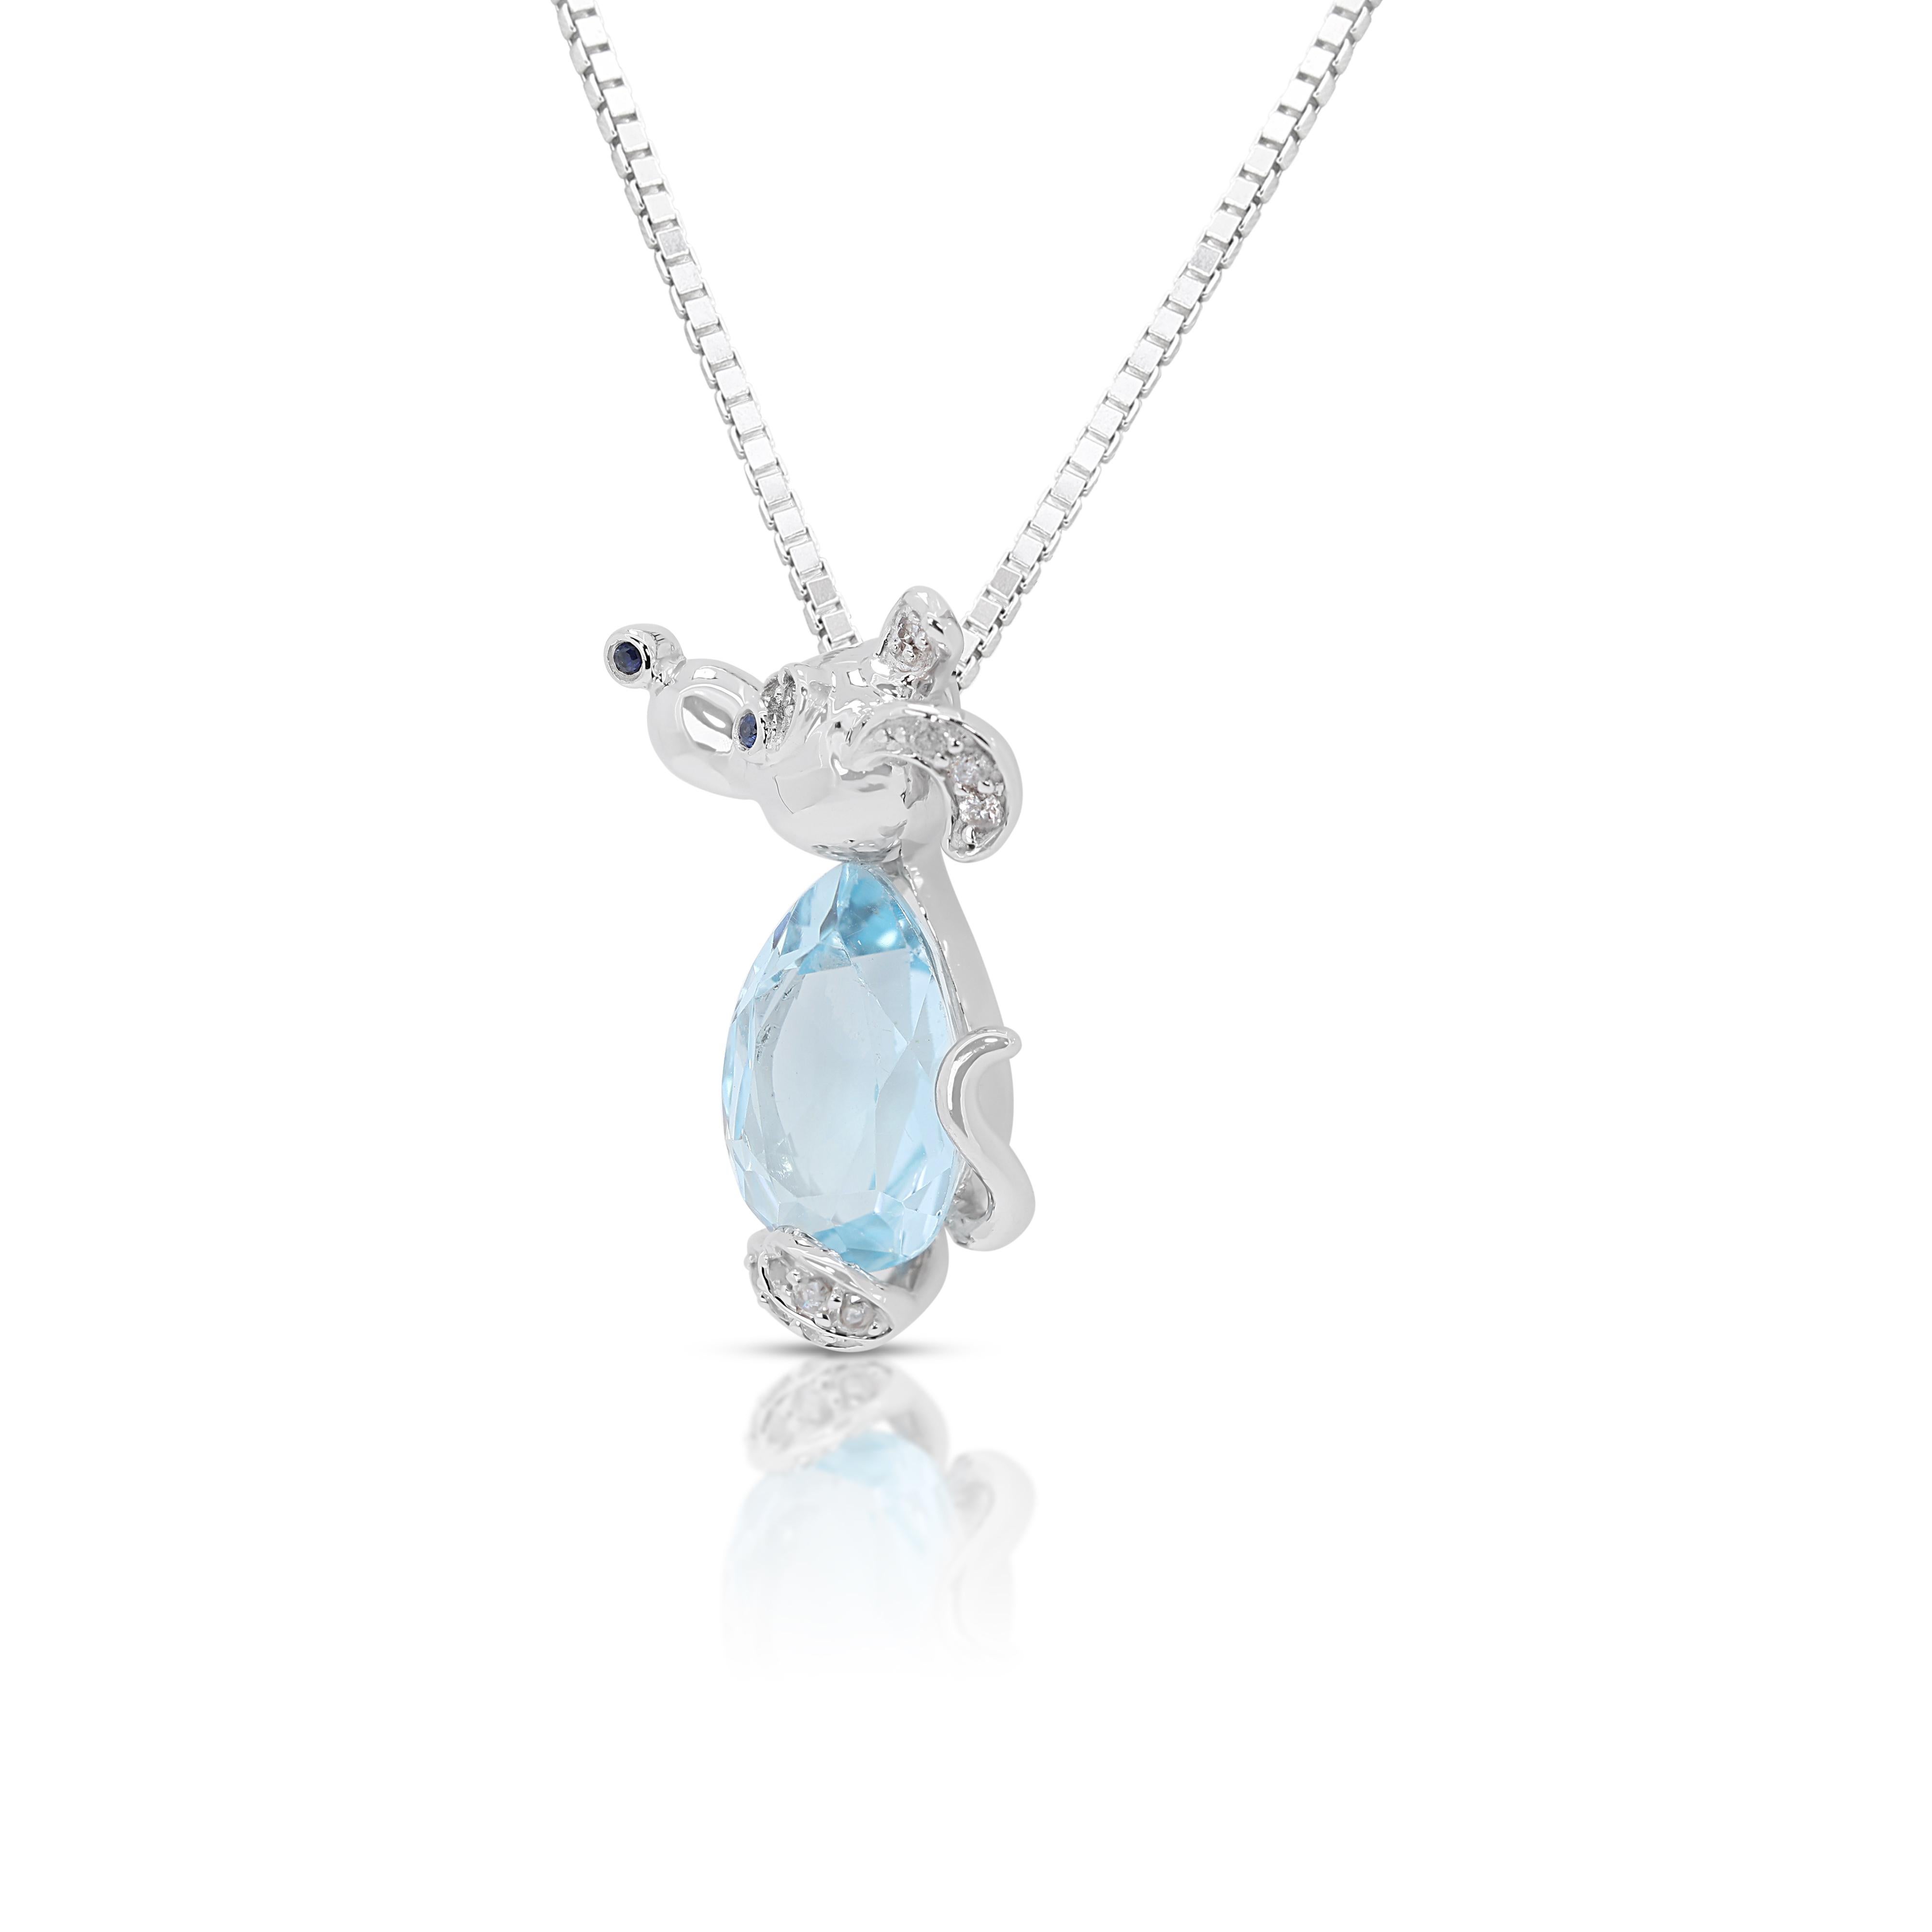 Pear Cut Shining 1.45ct Topaz Pendant w/ Sapphires & Diamonds - (Chain not Included) For Sale